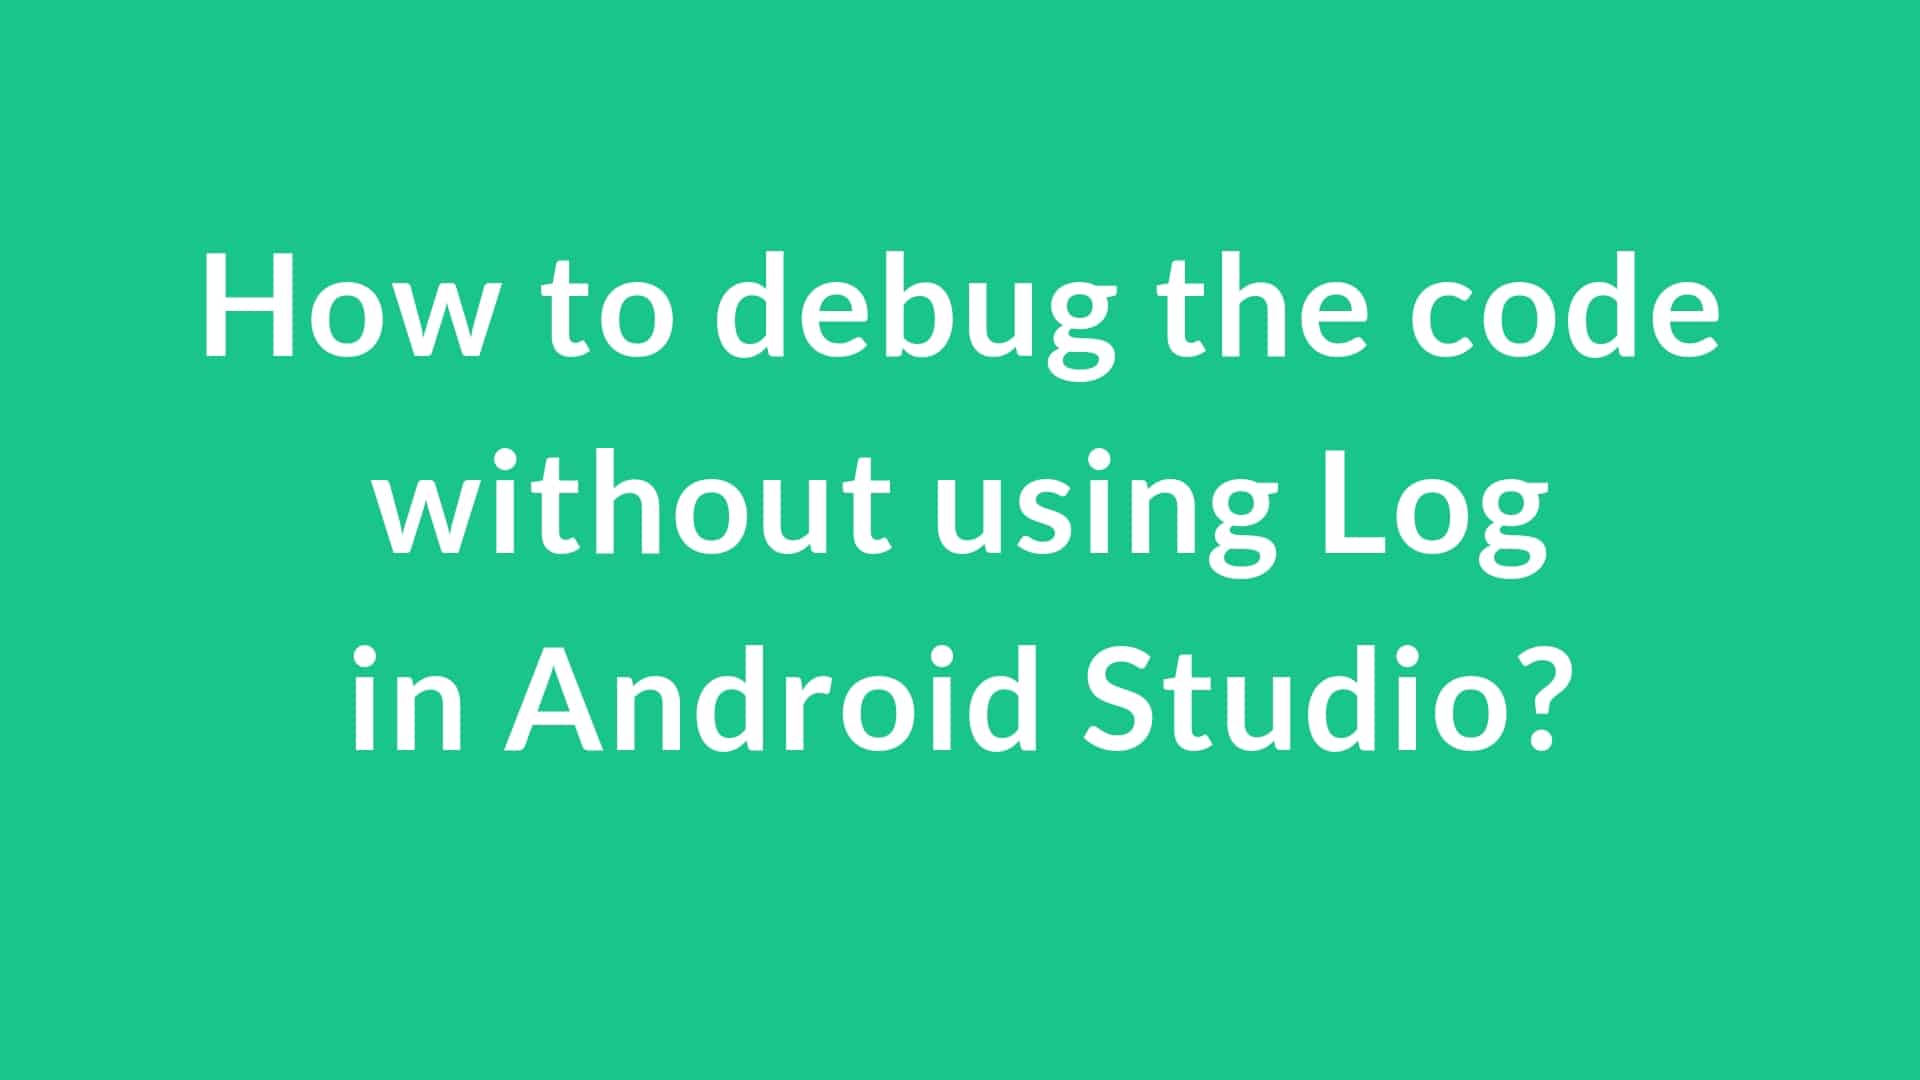 How to debug the code without using Log in android studio?